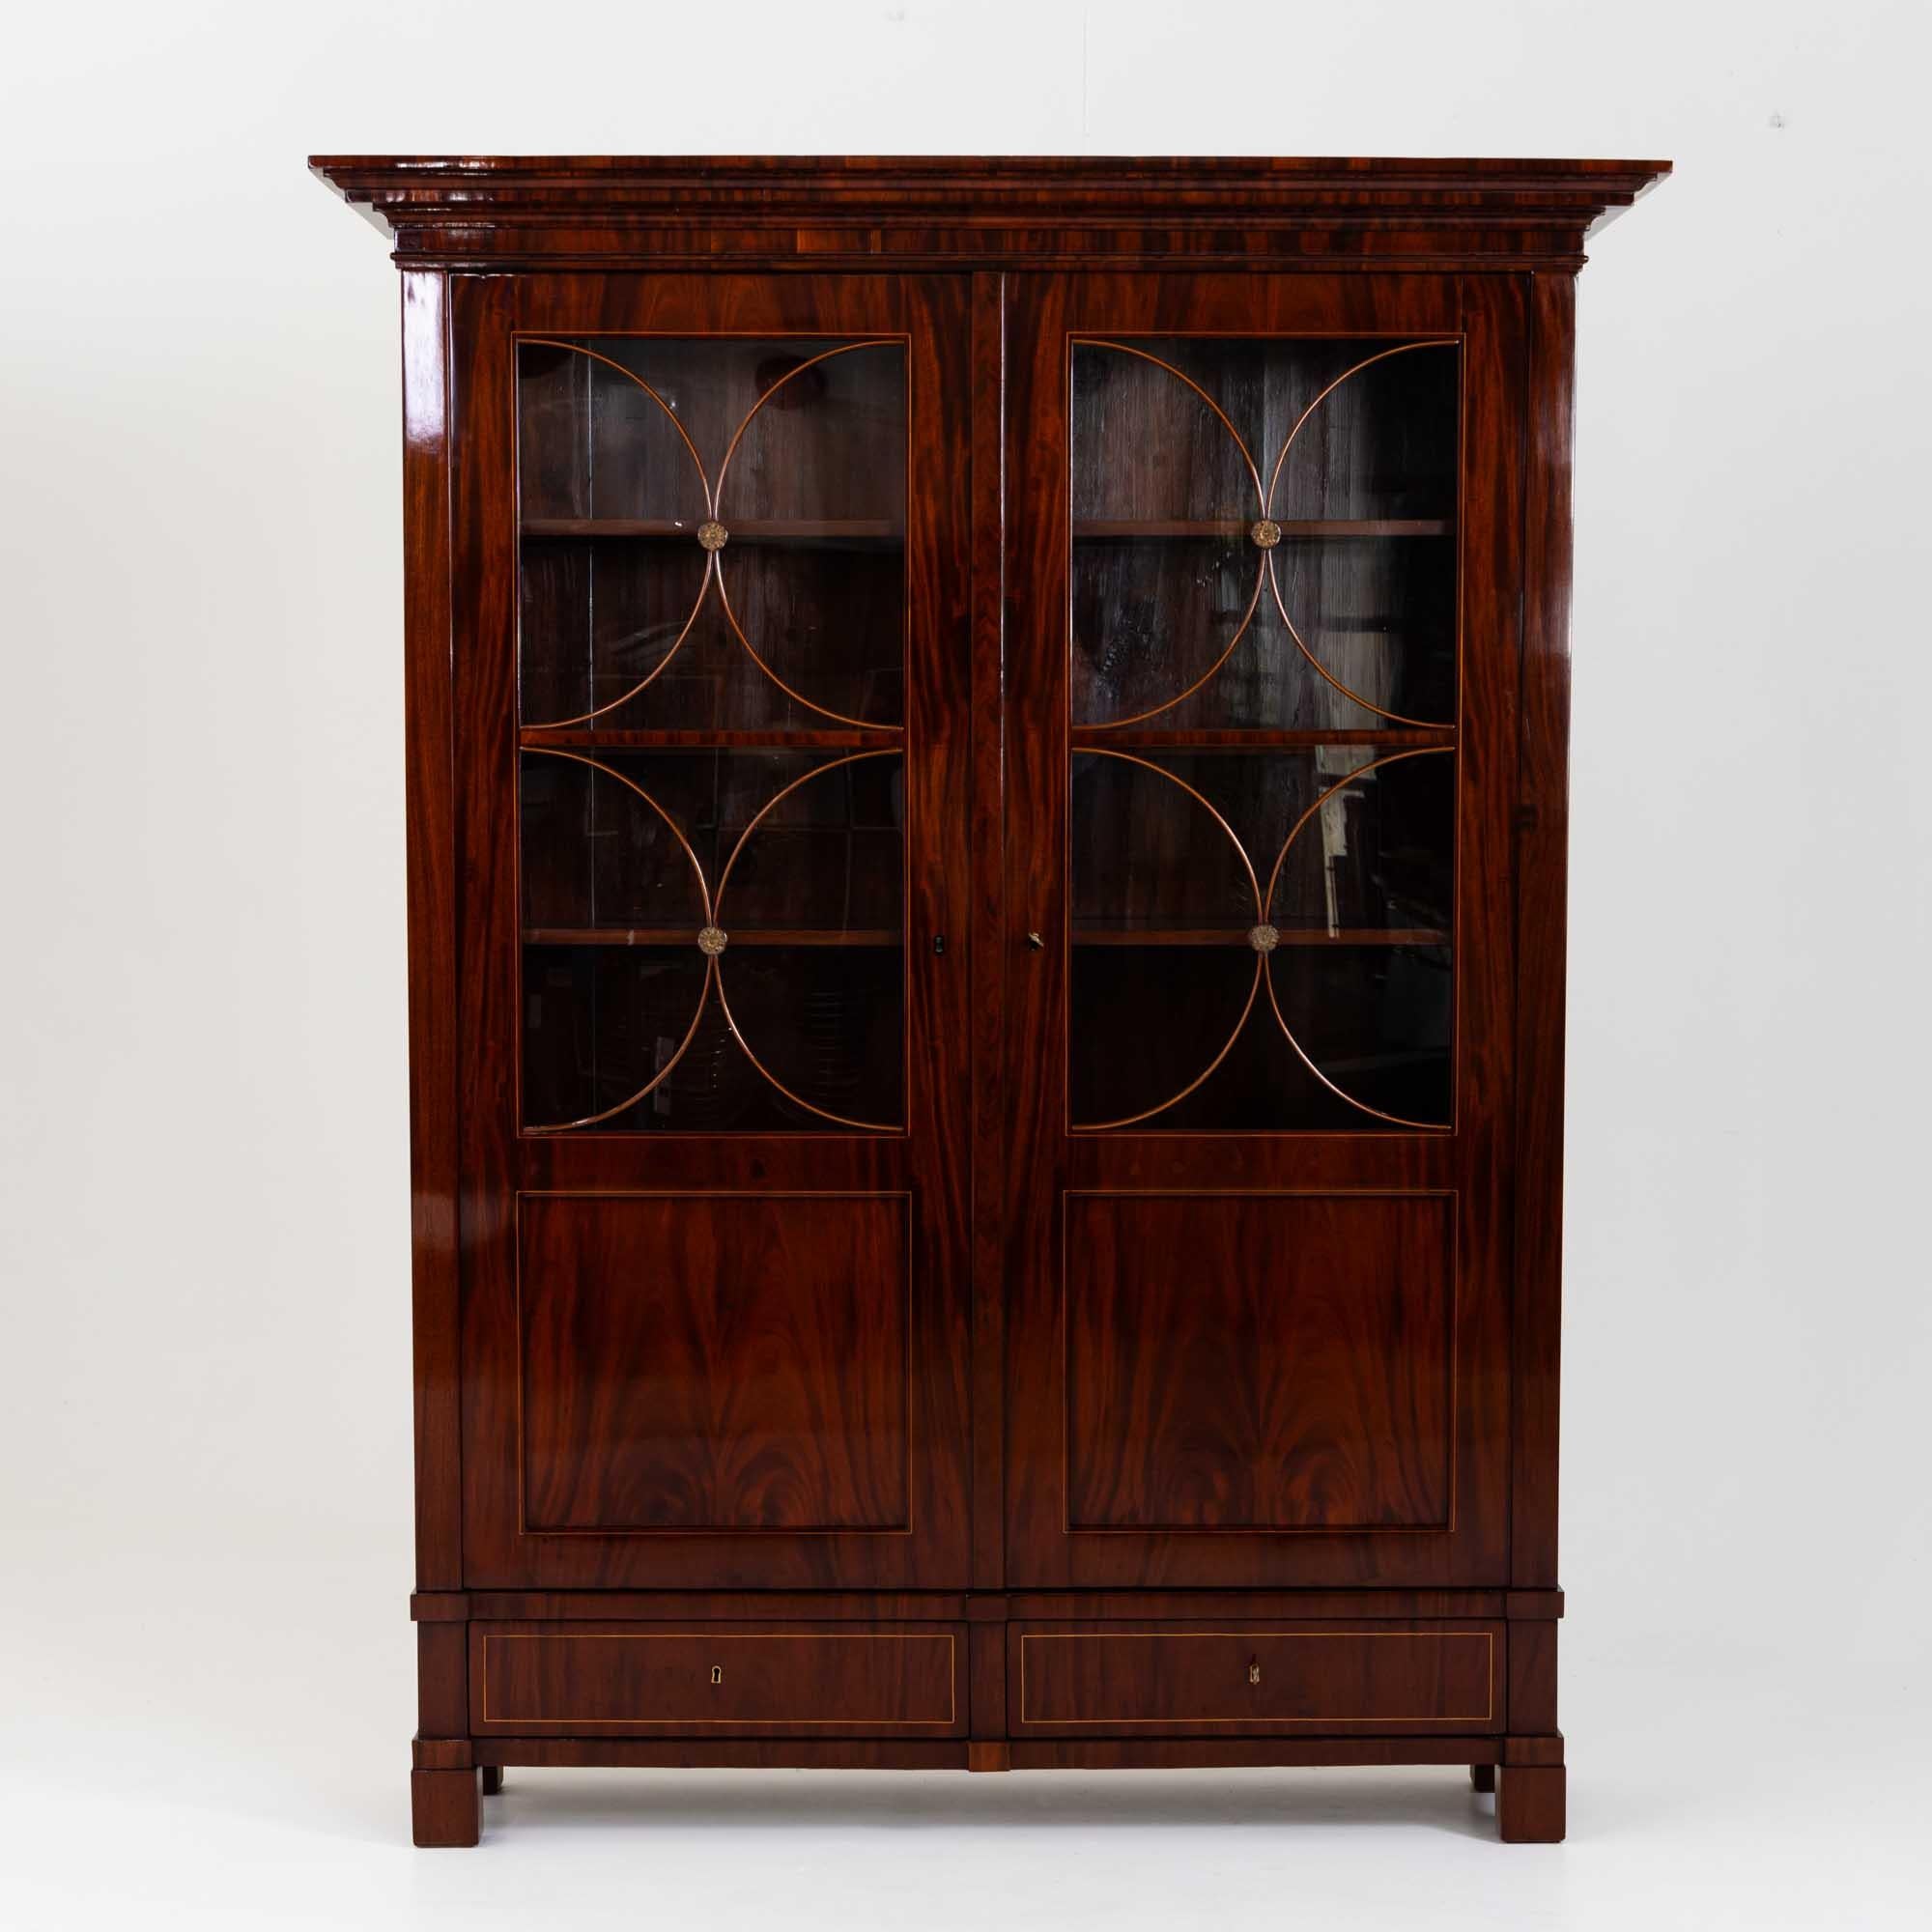 Biedermeier bookcase with a straight, multi-profiled cornice and doors with two-thirds glazing including c-shaped bar, each decorated in the centre with a bronze rosette. The cabinet also has two drawers in the plinth zone and stands on square feet.